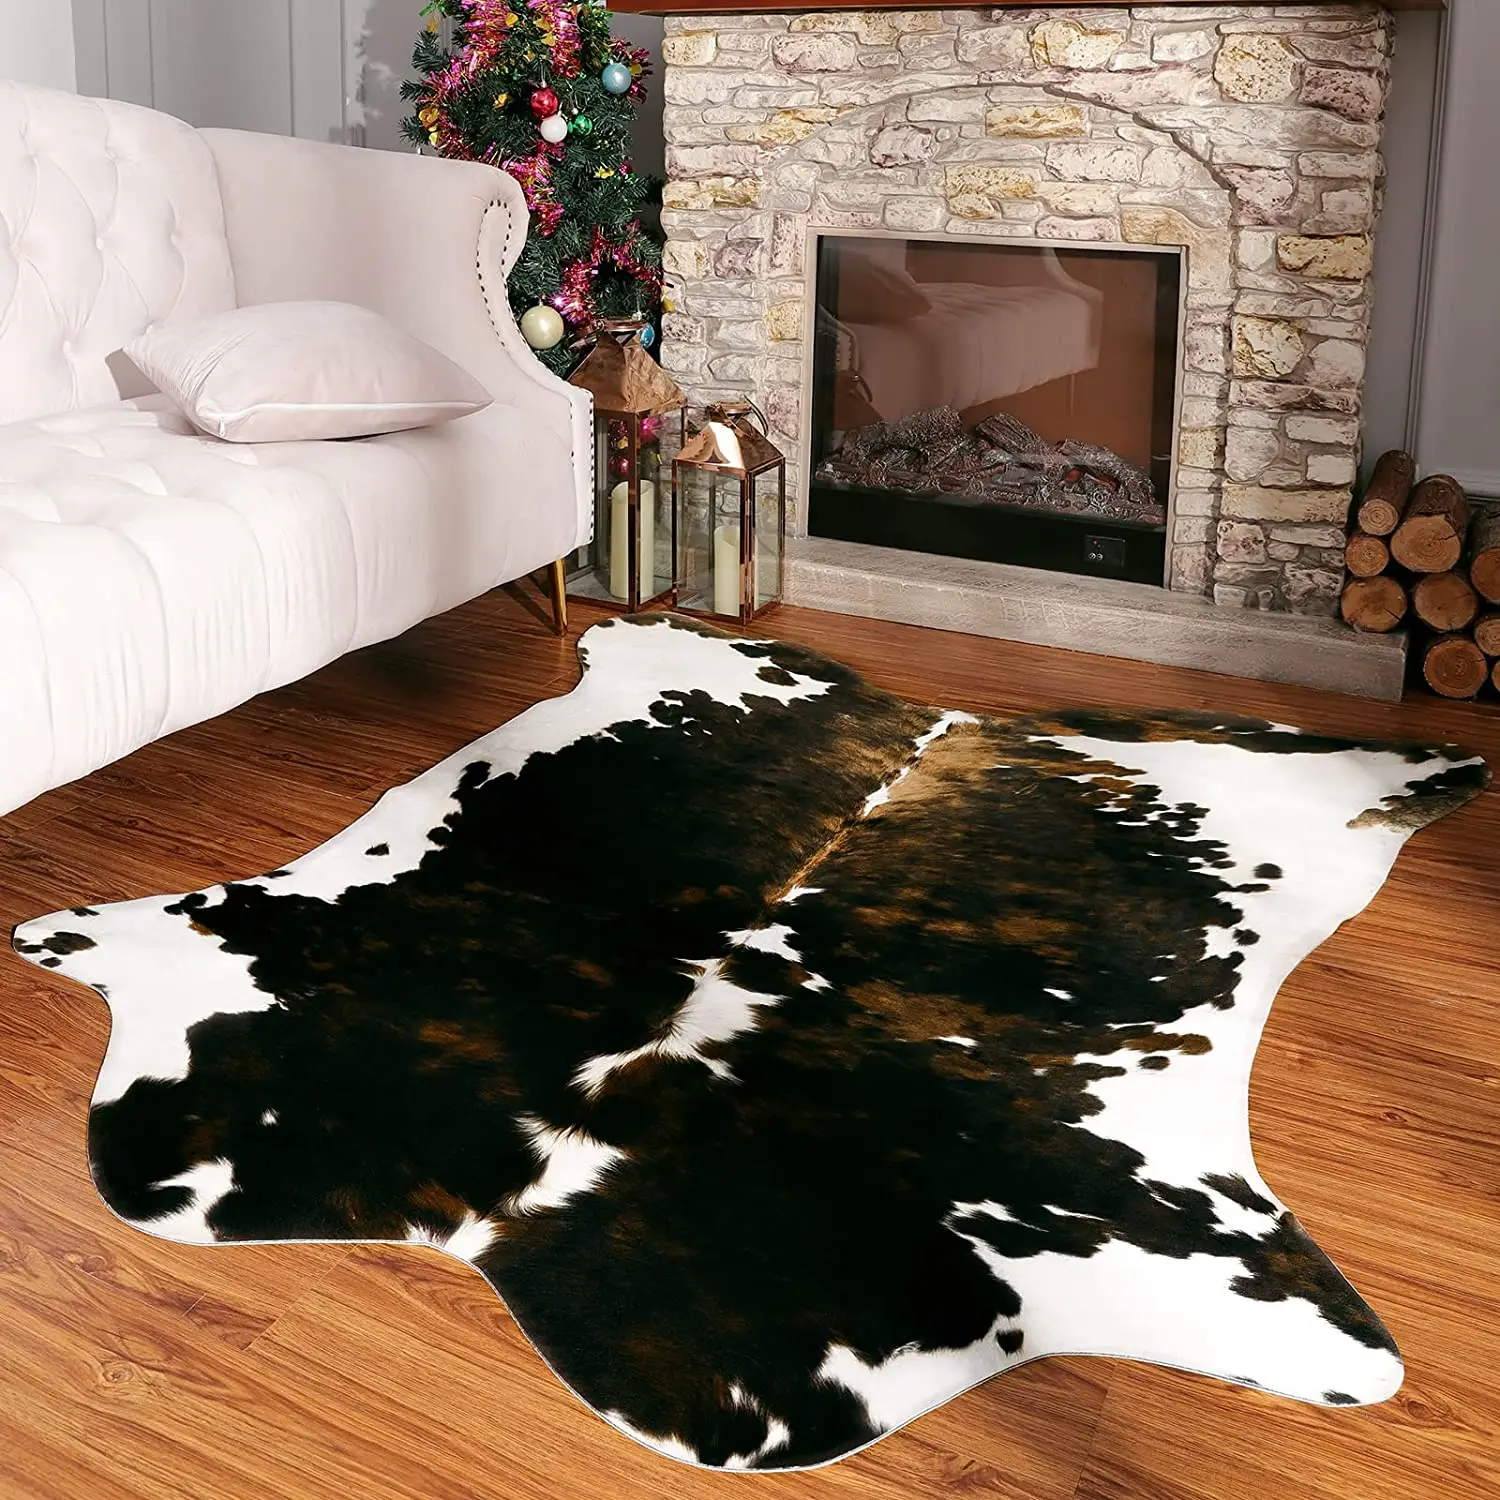 American Style Cowhide Carpet Cow Print Rug for Bedroom Living Room Cute  Animal Printed Carpet Faux Cowhide Rugs for Home Decor